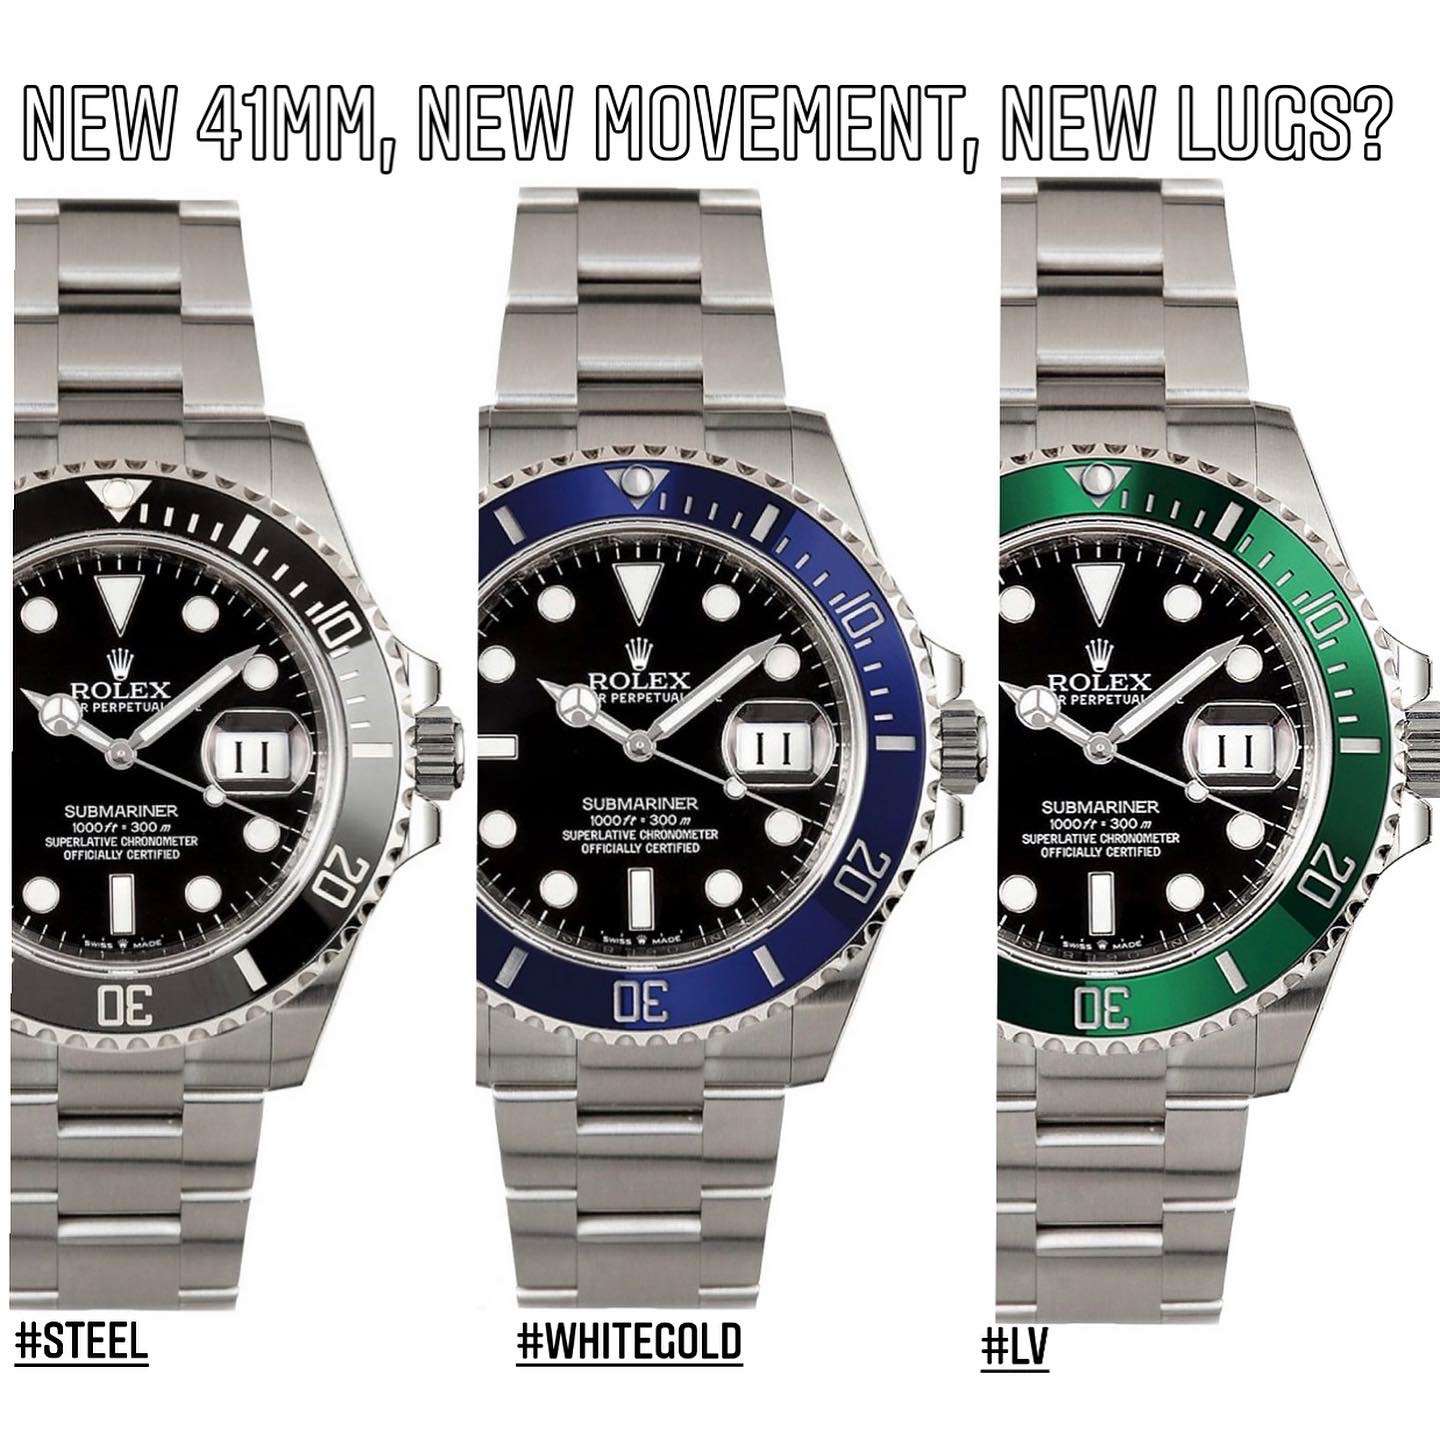 Humanistisk type Sæt tøj væk My Rolex 2020 Predictions - News is out! Spot on :) - Rolex Passion Report